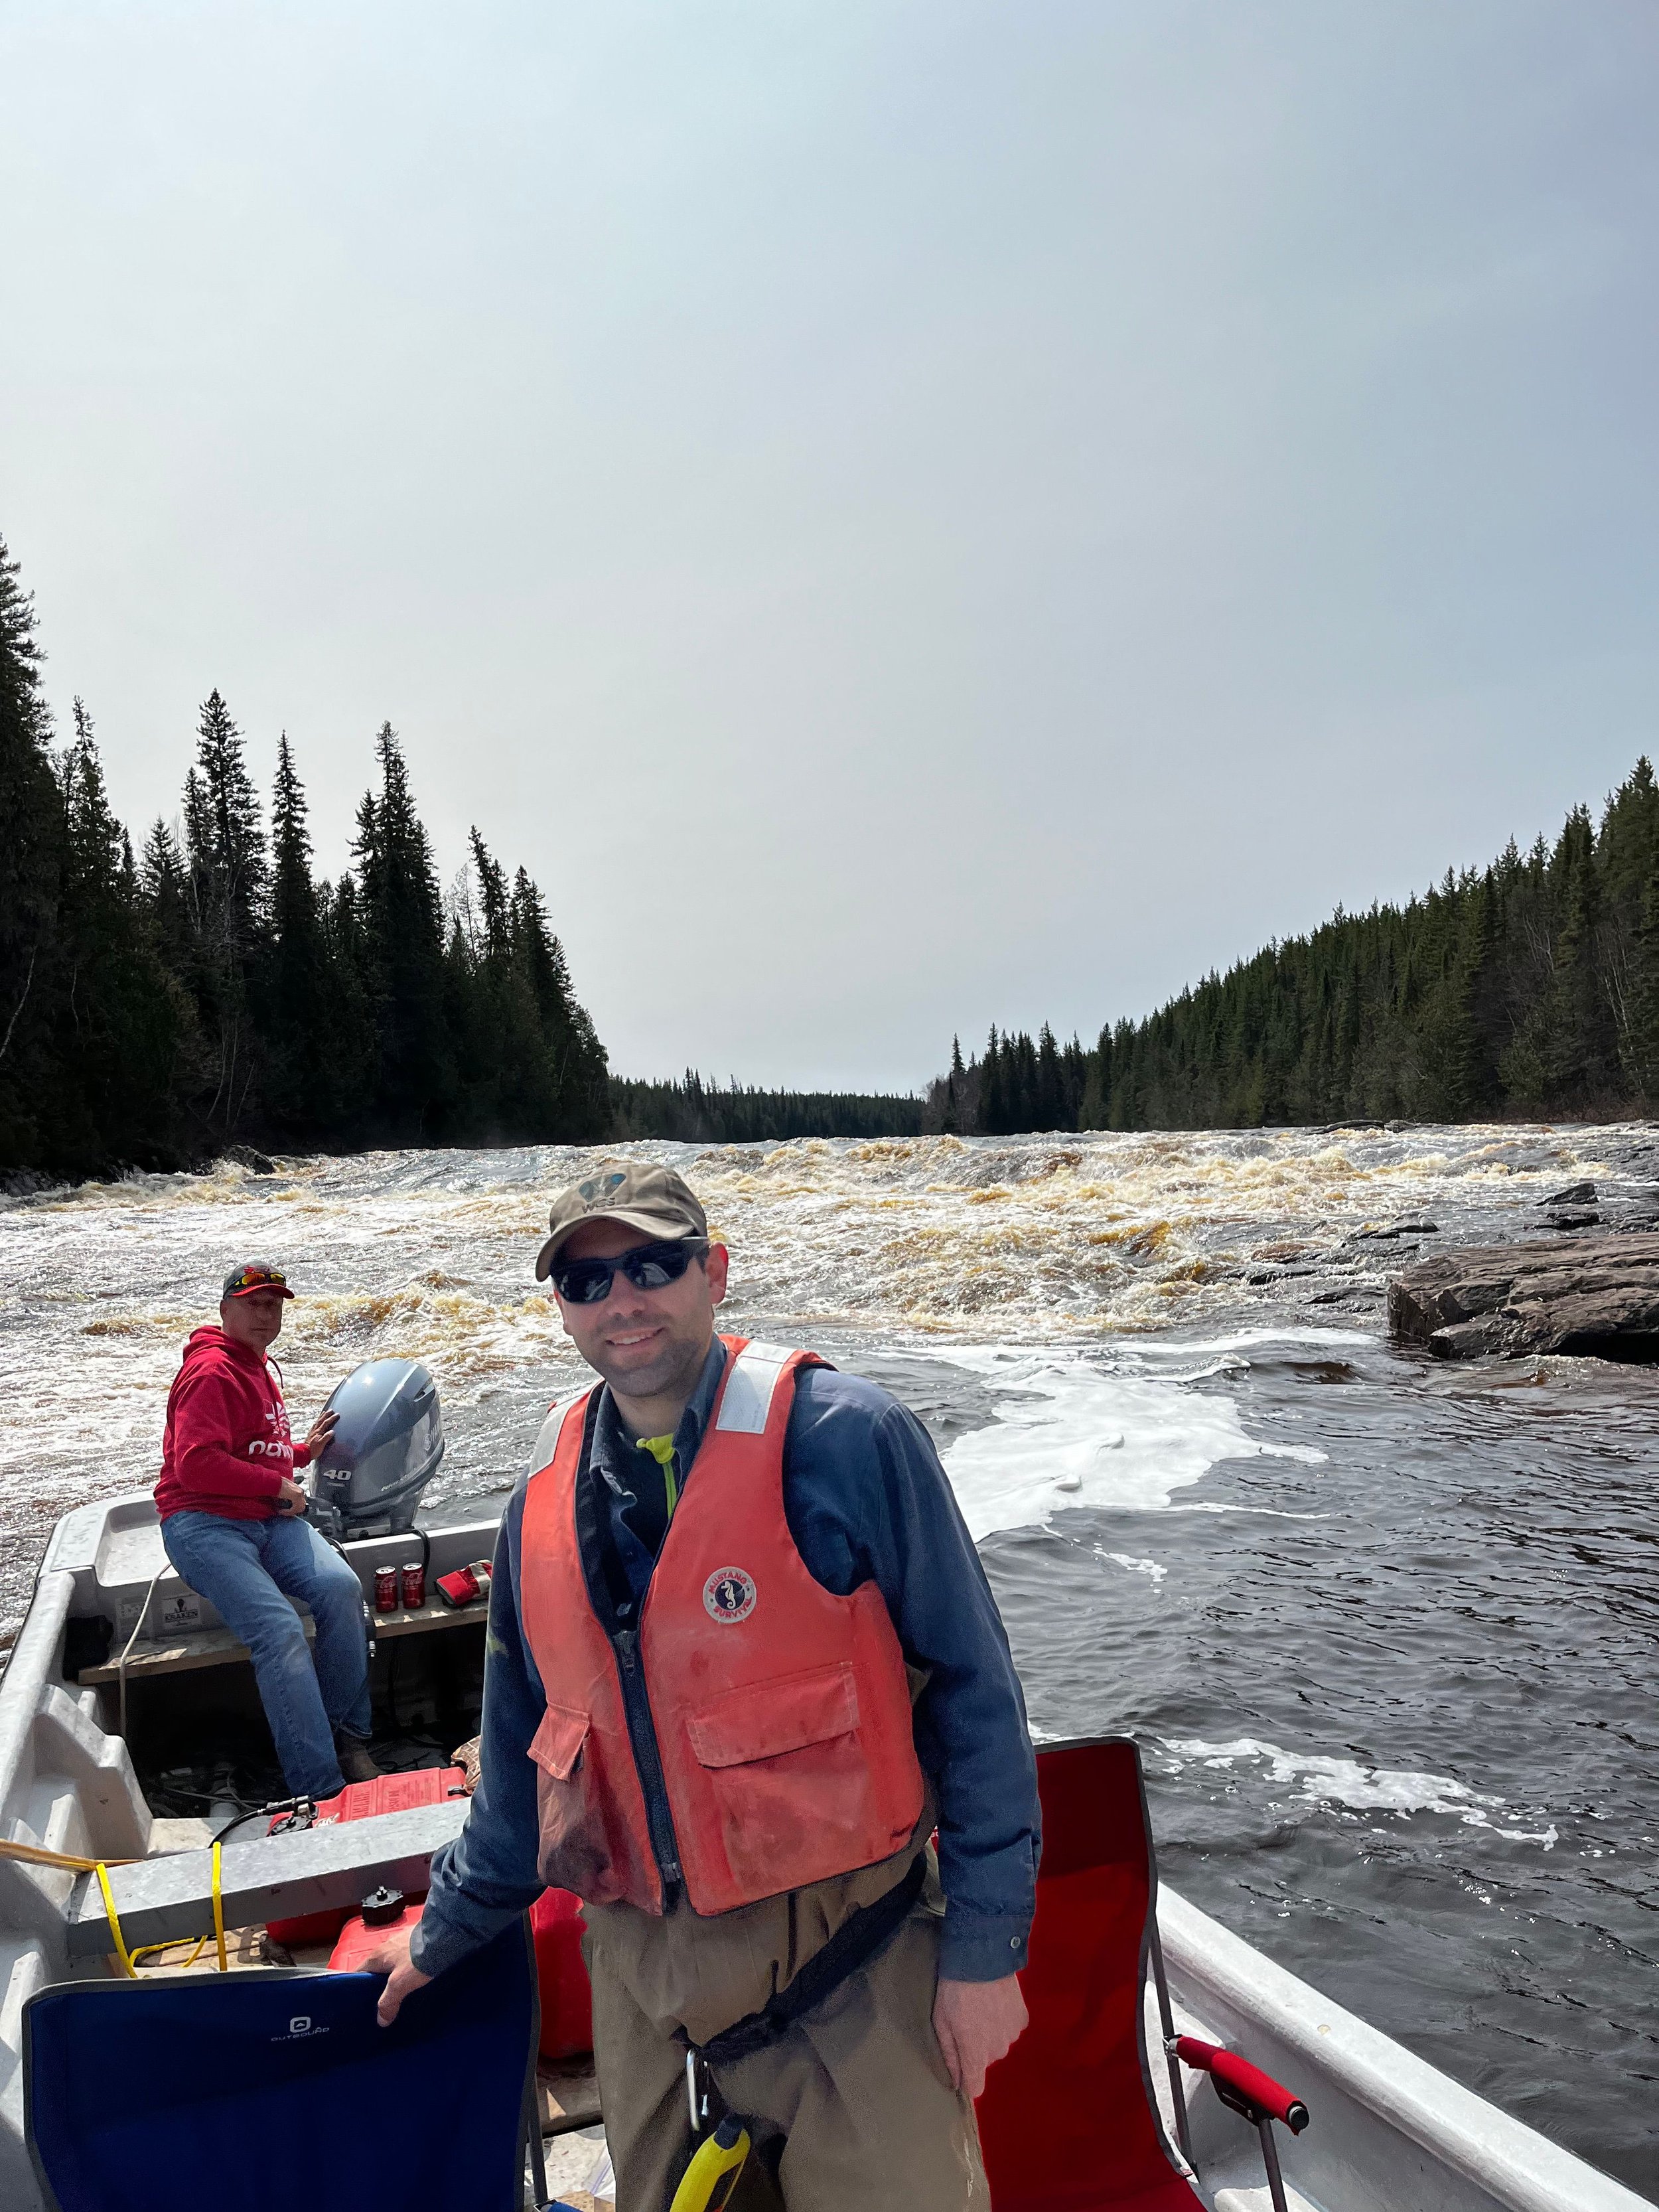 Jacob Seguin (right, WCS Canada) and Phil Sutherland (left, Sutherland Exploration Services) smile for photographer Warren on the North French River